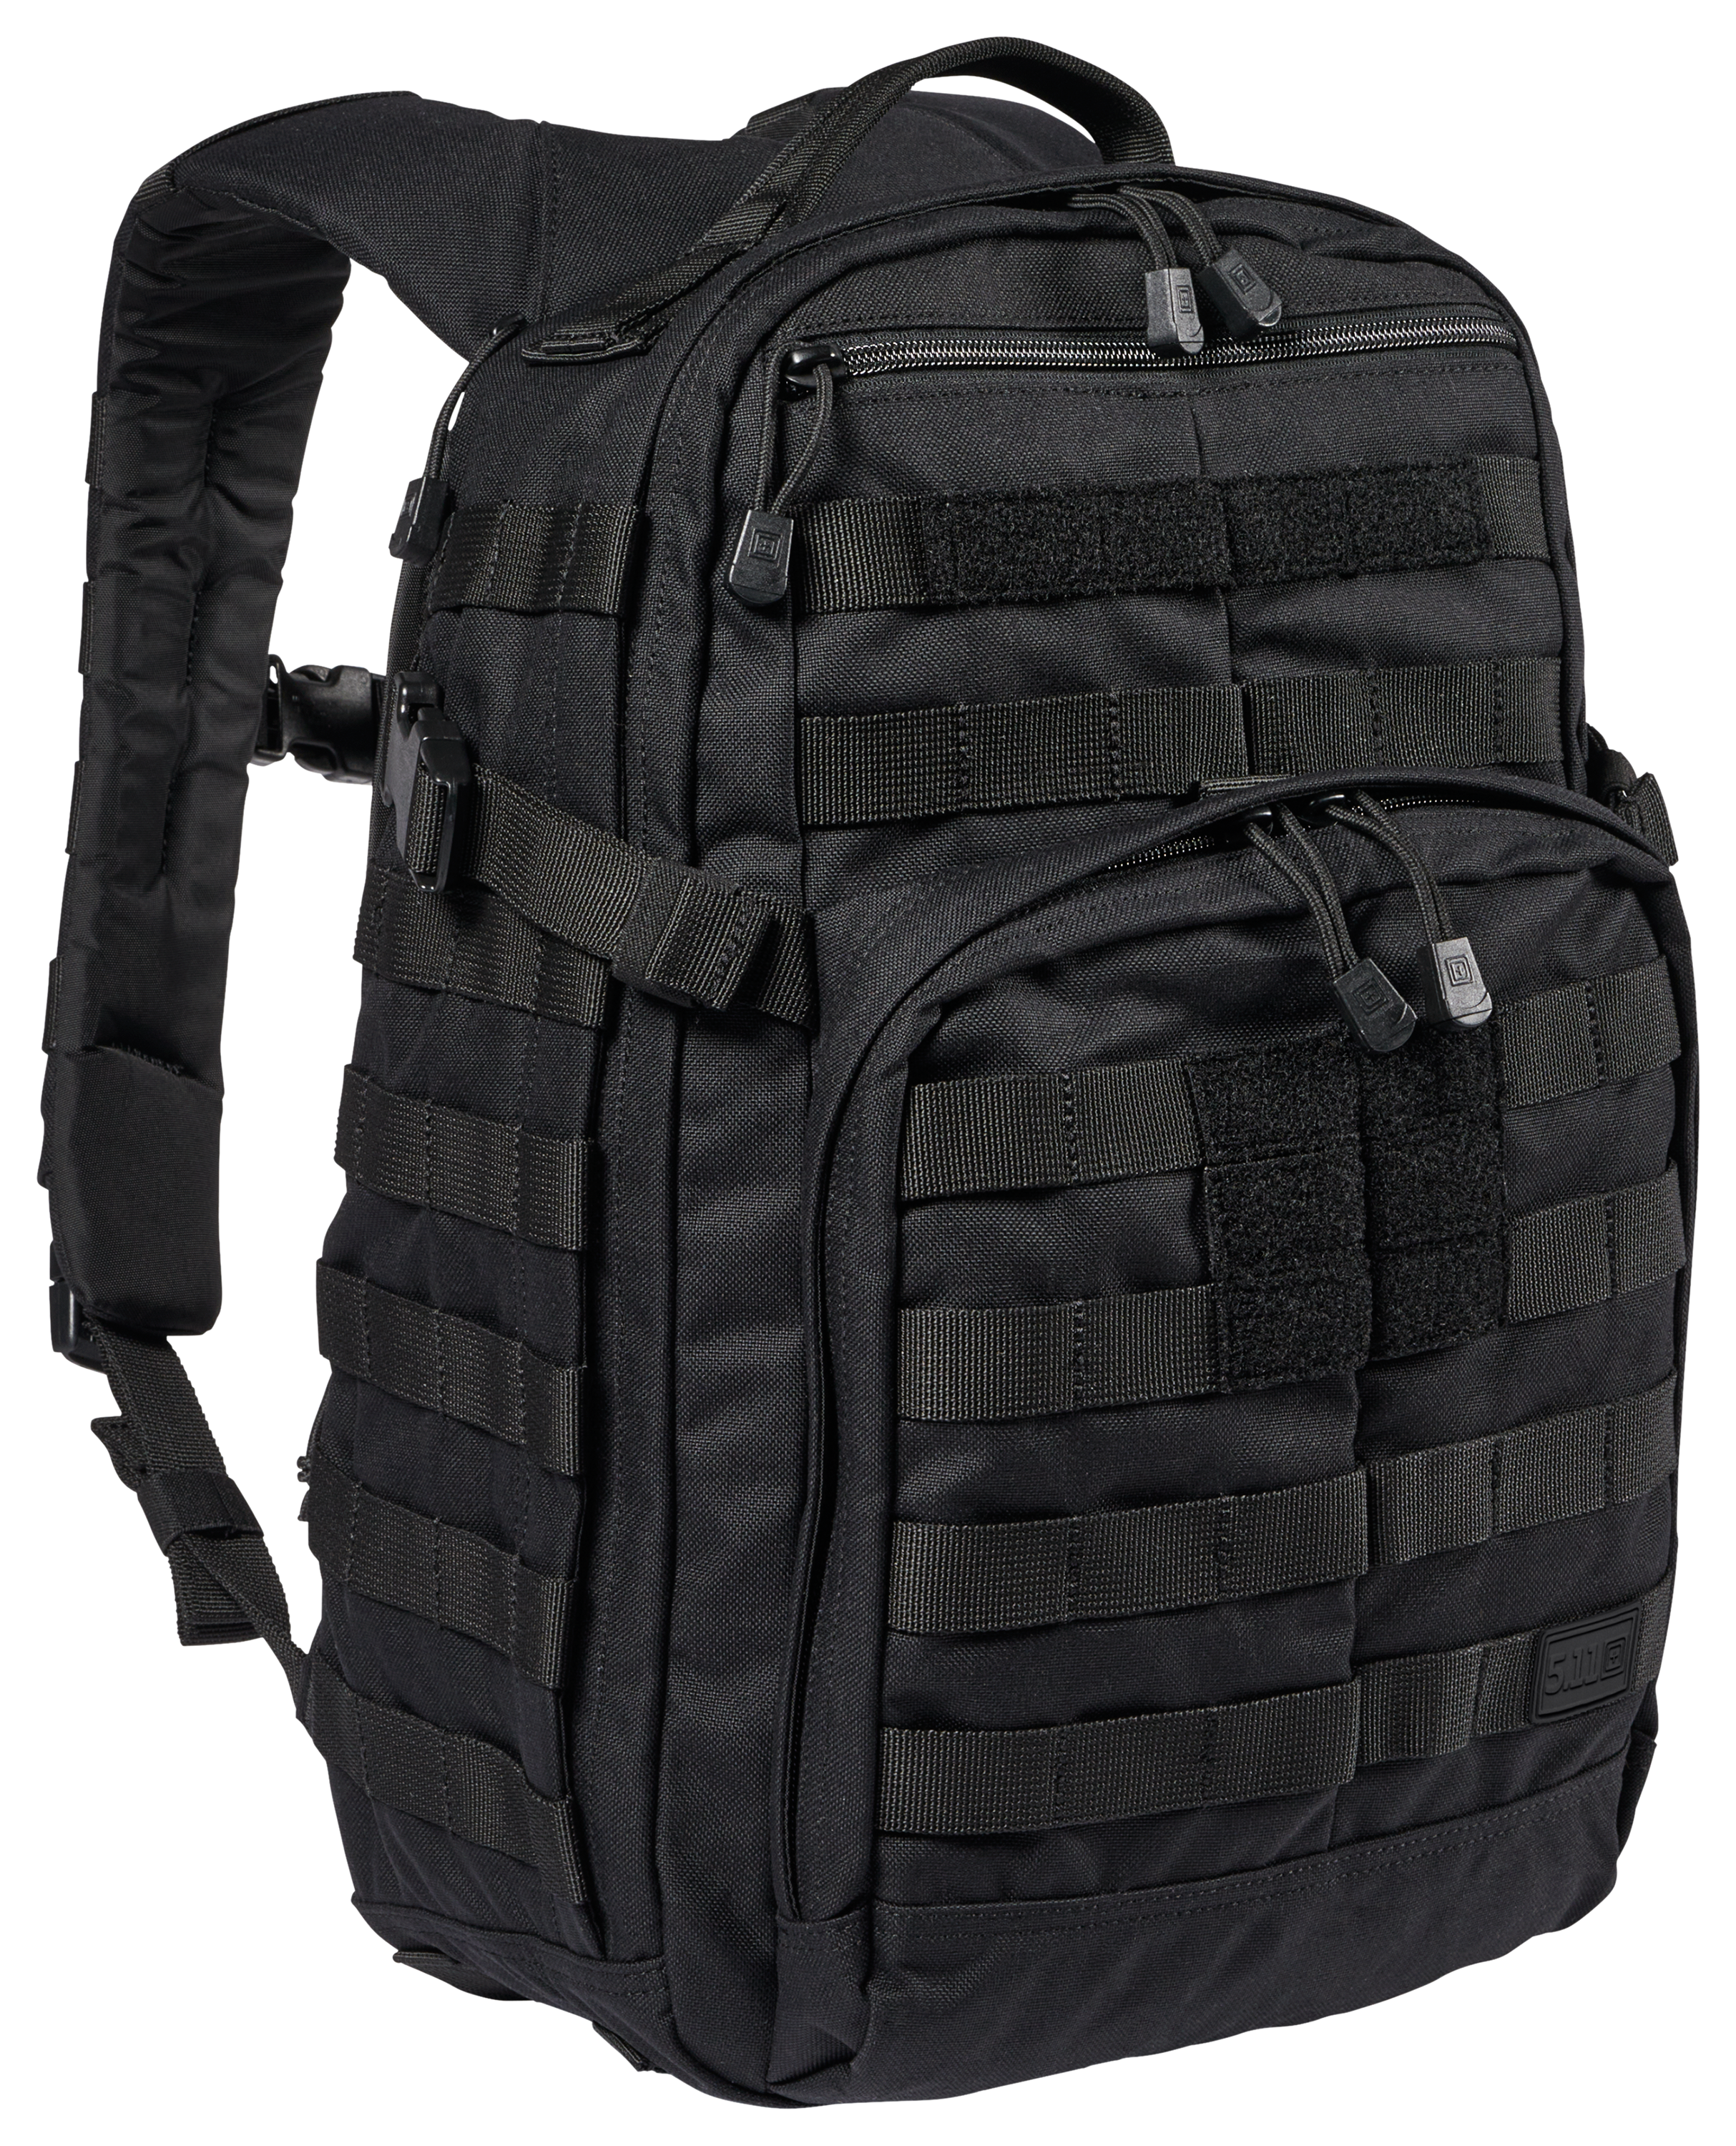 5.11 Tactical Police Velcro ID Panel